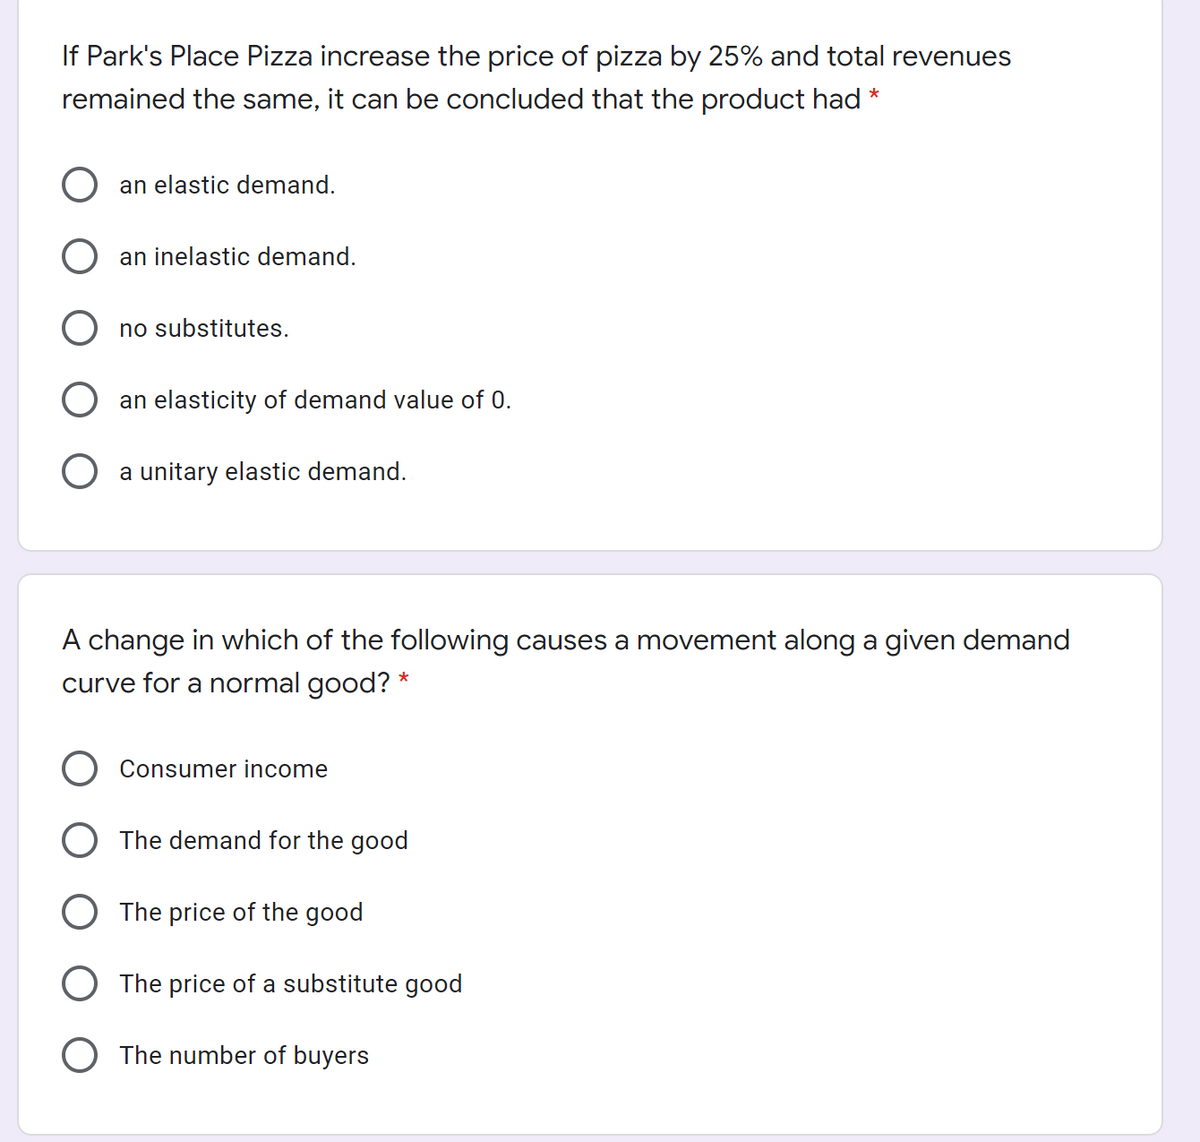 If Park's Place Pizza increase the price of pizza by 25% and total revenues
remained the same, it can be concluded that the product had *
an elastic demand.
an inelastic demand.
no substitutes.
an elasticity of demand value of 0.
a unitary elastic demand.
A change in which of the following causes a movement along a given demand
curve for a normal good? *
Consumer income
The demand for the good
The price of the good
The price of a substitute good
The number of buyers
